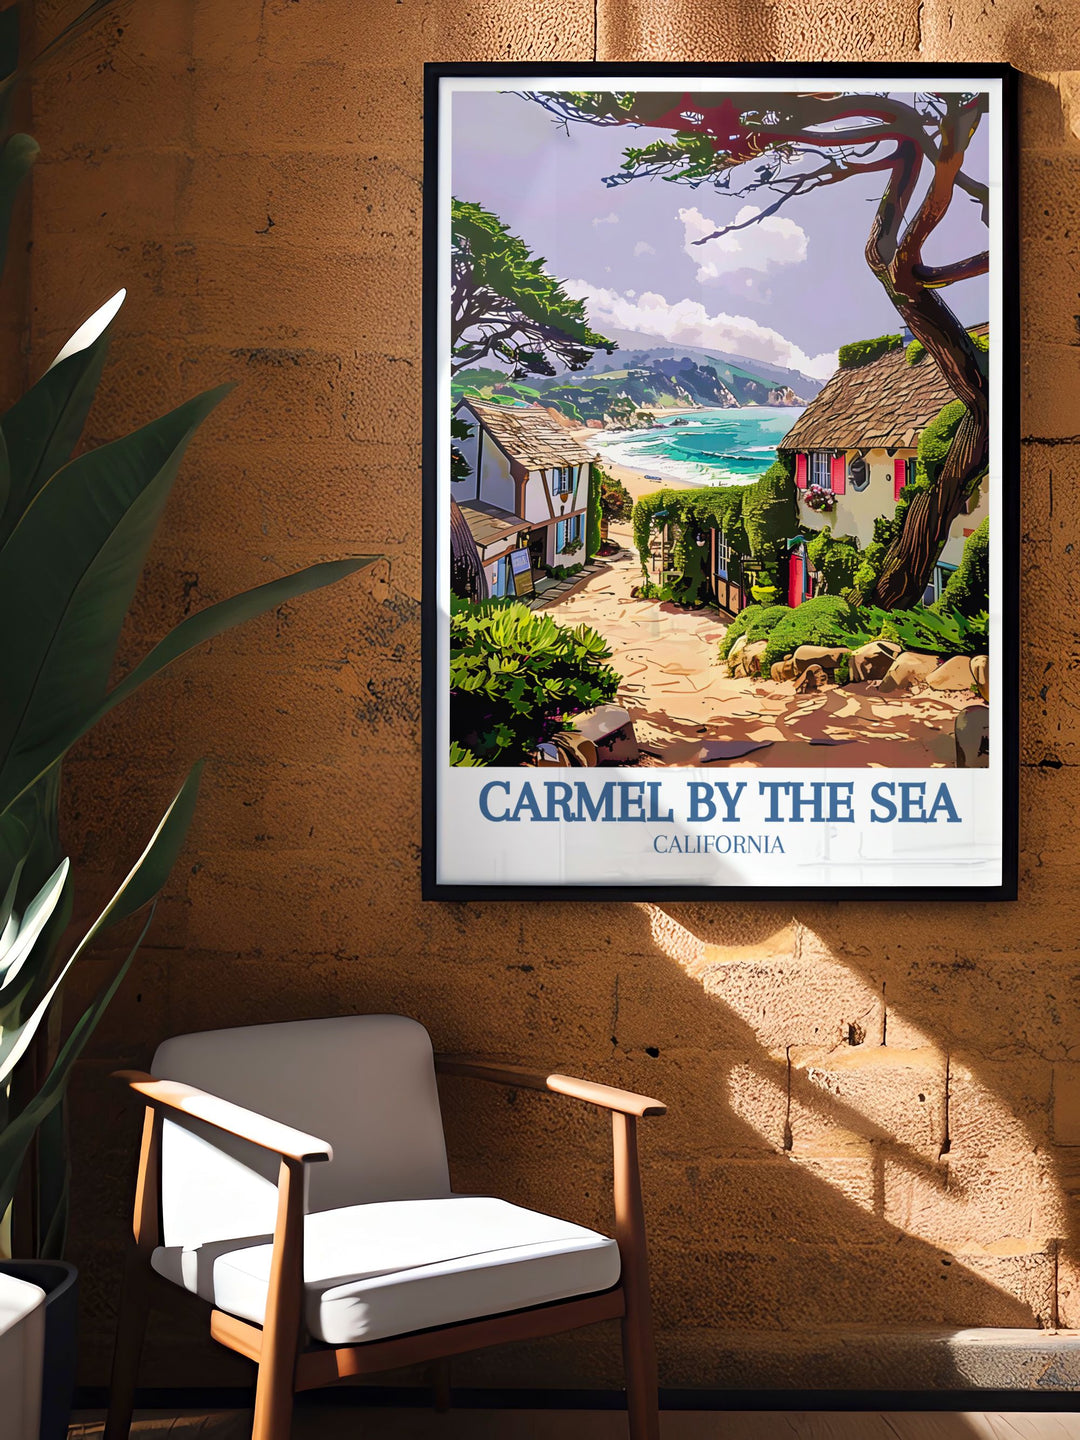 This travel poster beautifully depicts the vibrant life of Ocean Avenue in Carmel by the Sea, with its charming shops and delightful cafes, making it an ideal piece for culture enthusiasts and collectors. Bring the spirit of Carmel into your home with this exquisite print.